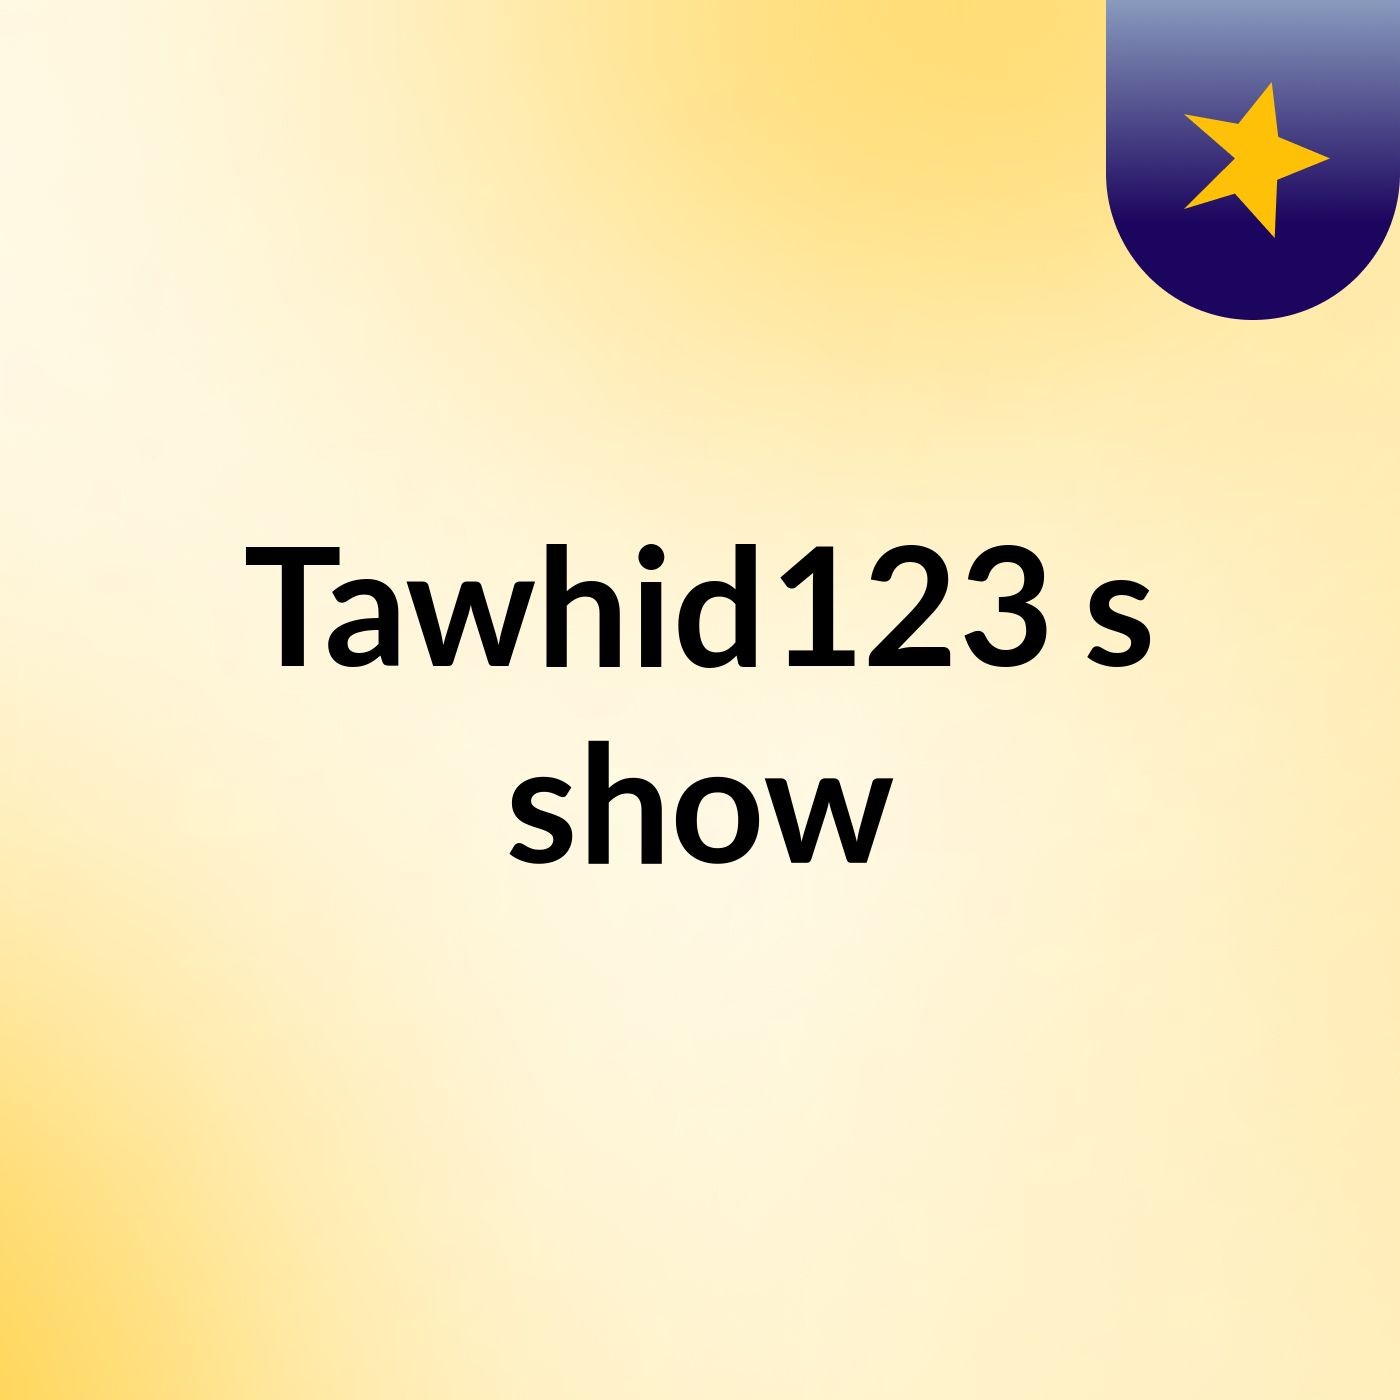 Tawhid123's show